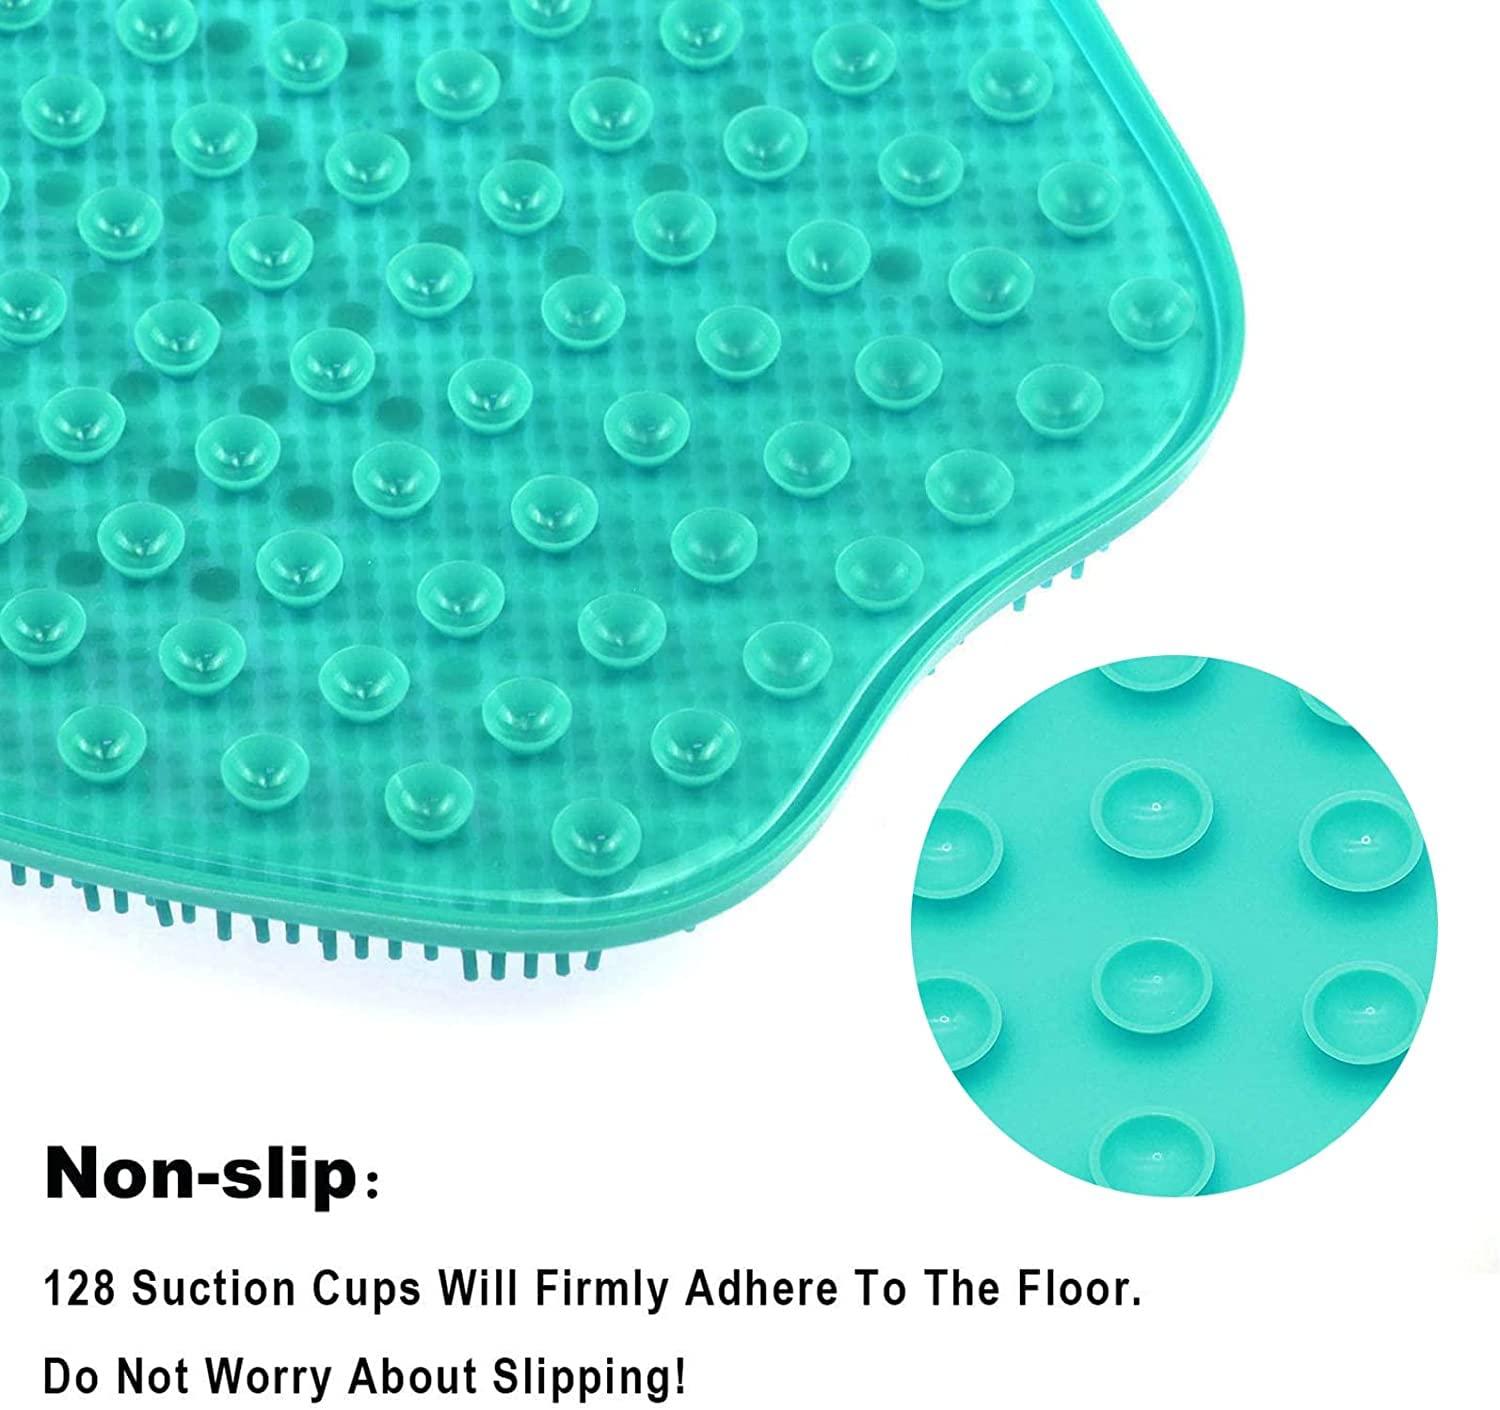 SlipX Solutions Extra Long Deep Foot Massager Bath Tub & Shower Mat 38x17 |  Non-Slip, 188 Suction Cups | Feels Great on Tired Feet, Looks Like River